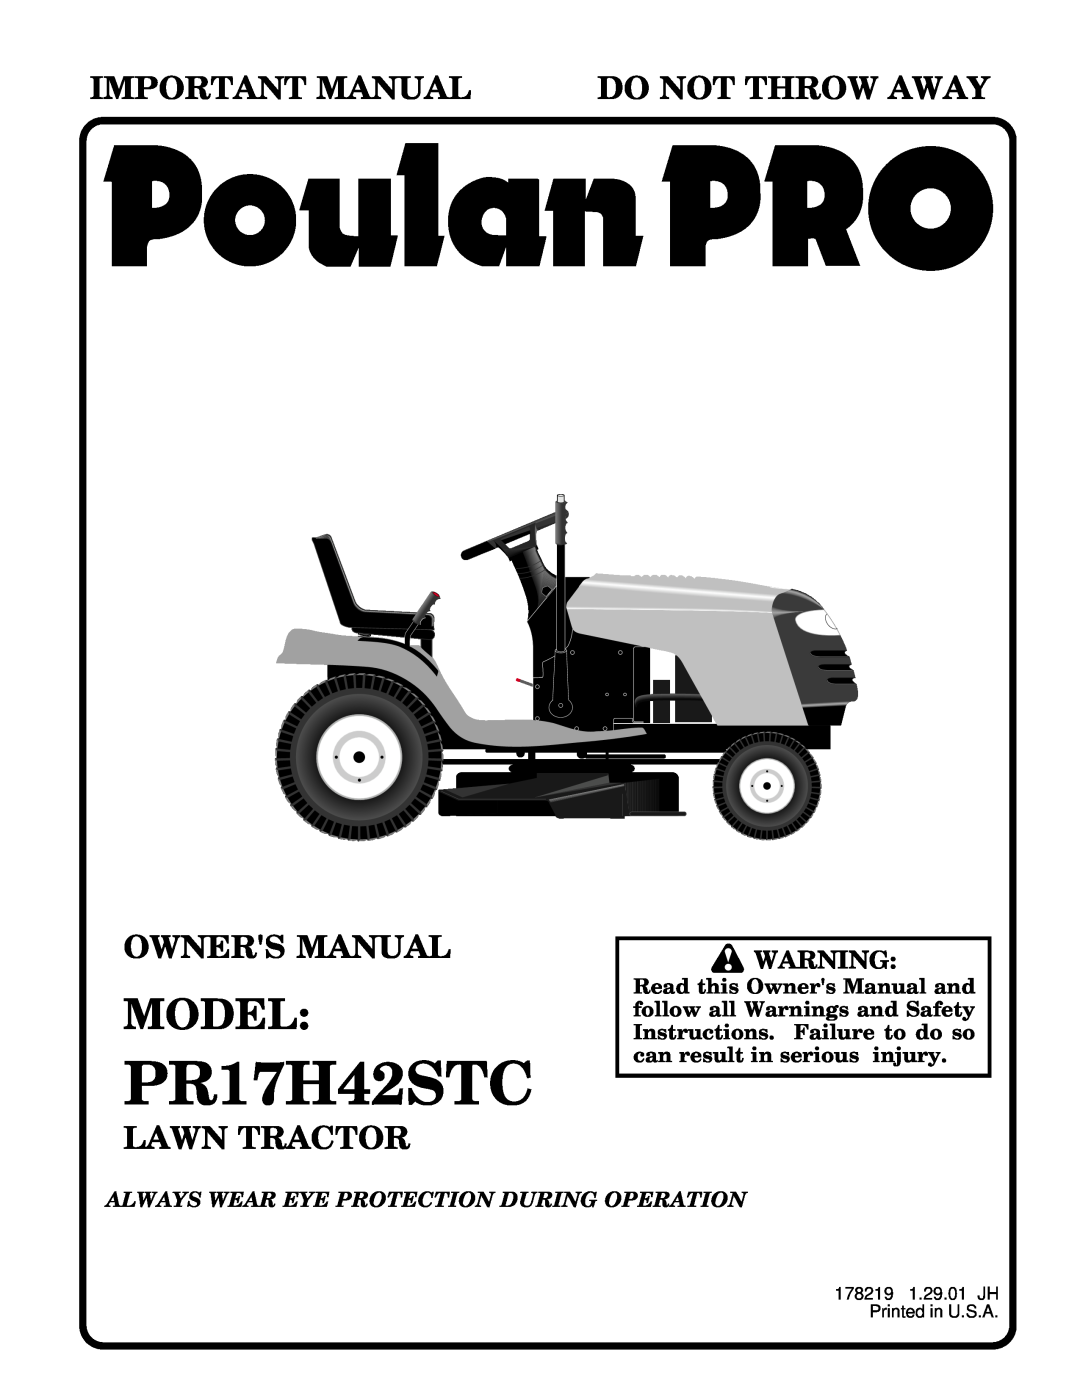 Poulan 178219 owner manual Model, PR17H42STC, Important Manual, Do Not Throw Away, Lawn Tractor 